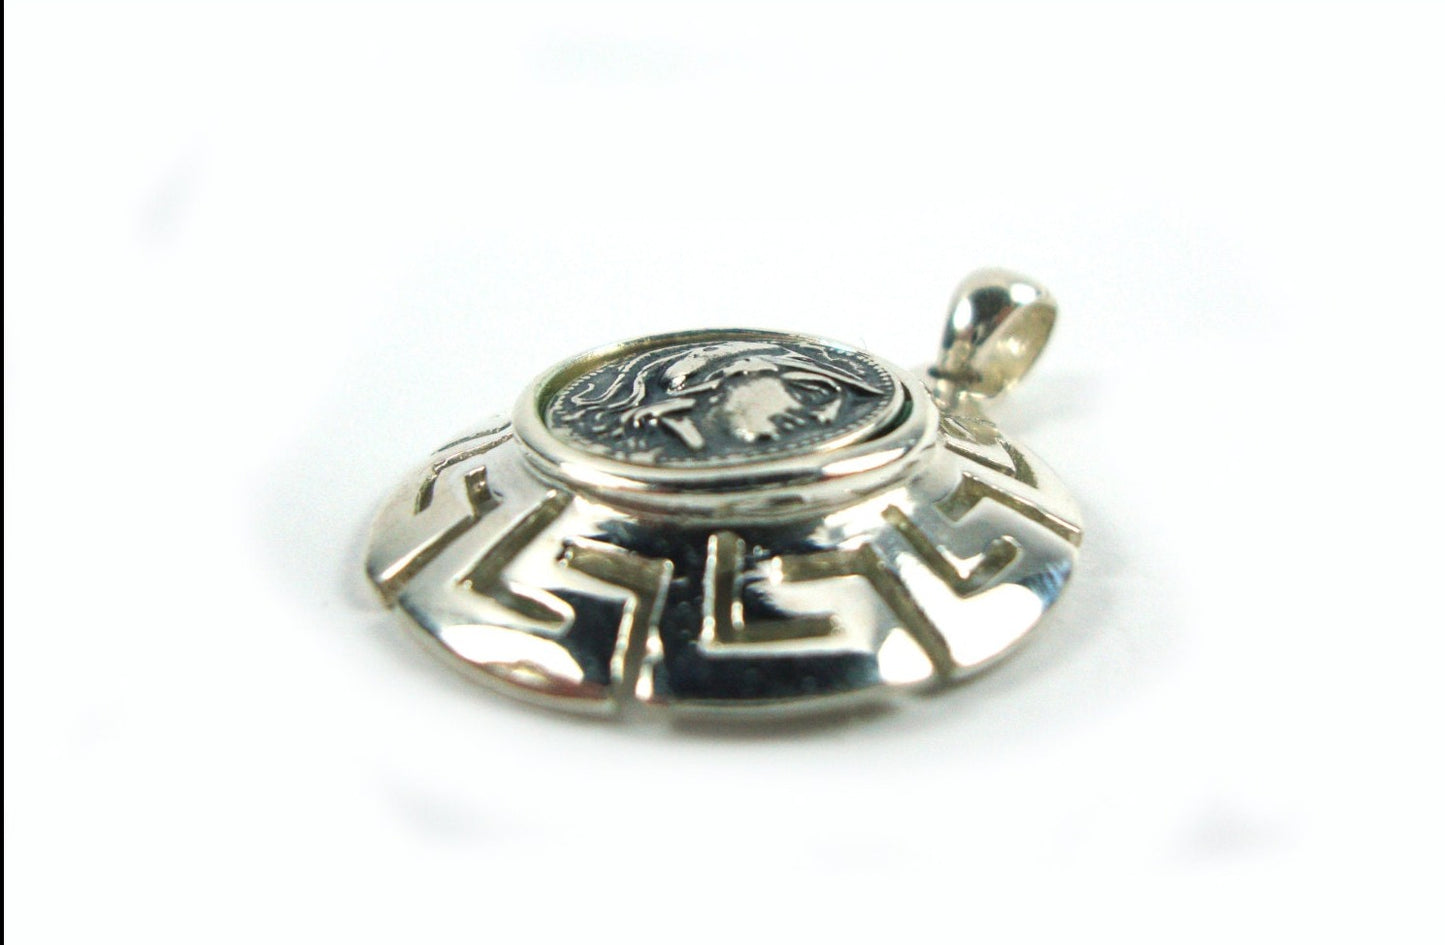 The side look of the Greek silver pendant that depicts goddess Athena and measuring 26mm in diameter.